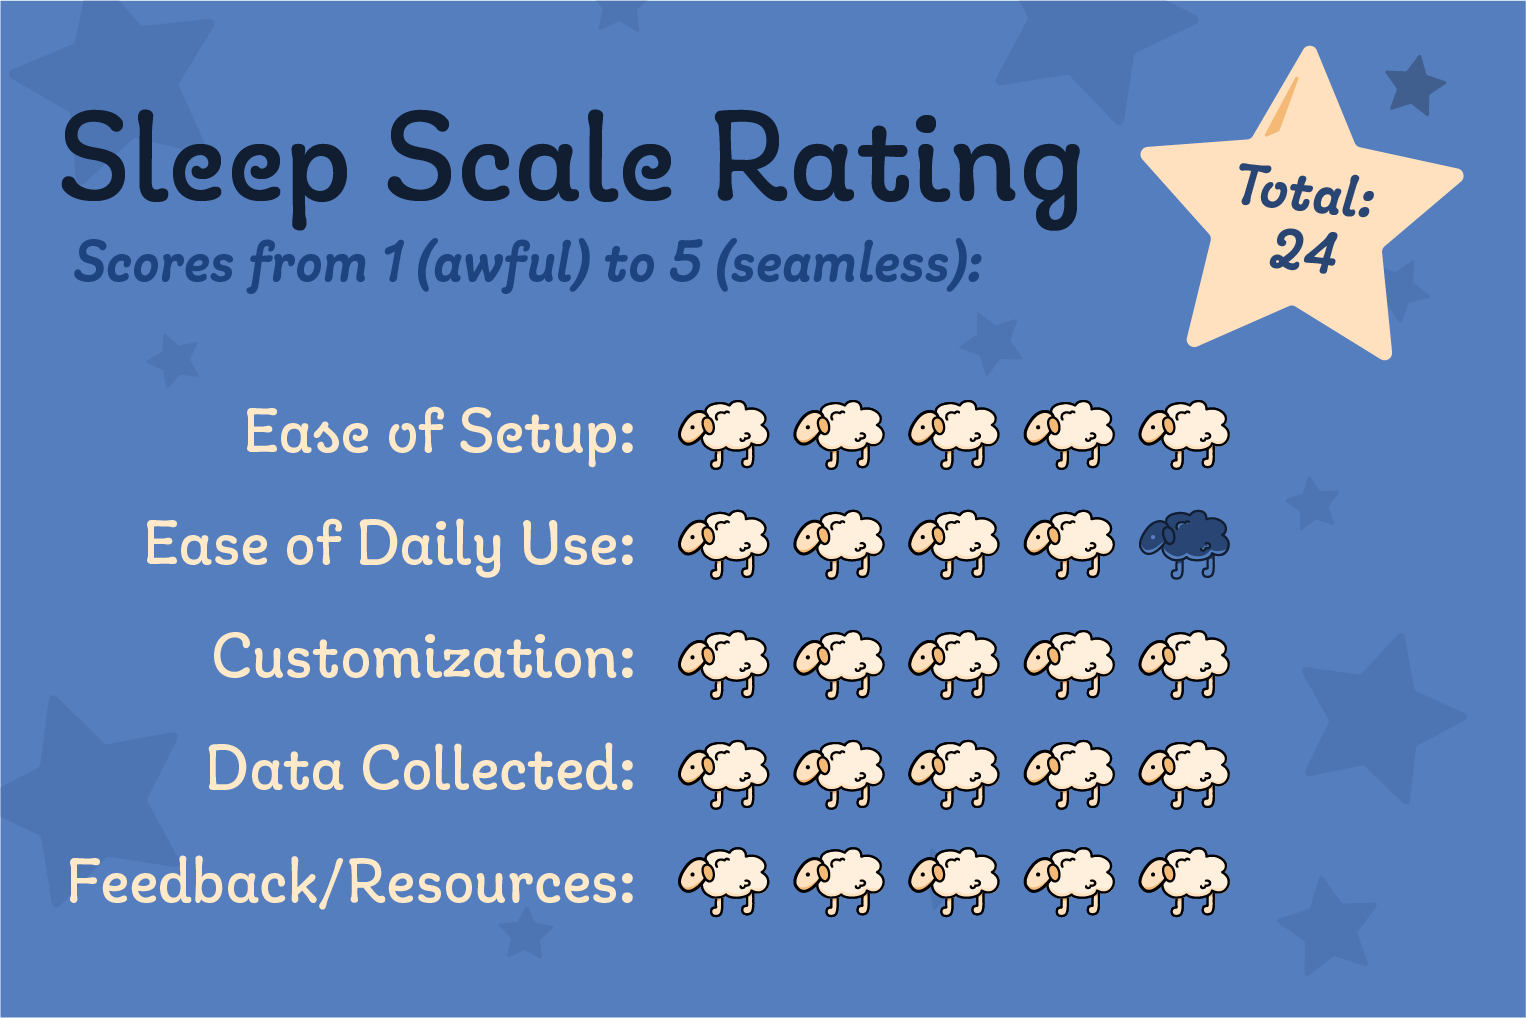 Scores from 1 (awful) to 5 (seamless):<br />
Ease of setup: 5<br />
Ease of daily use: 4<br />
Customization: 5<br />
Data collected: 5<br />
Feedback and resources: 5<br />
Total: 24